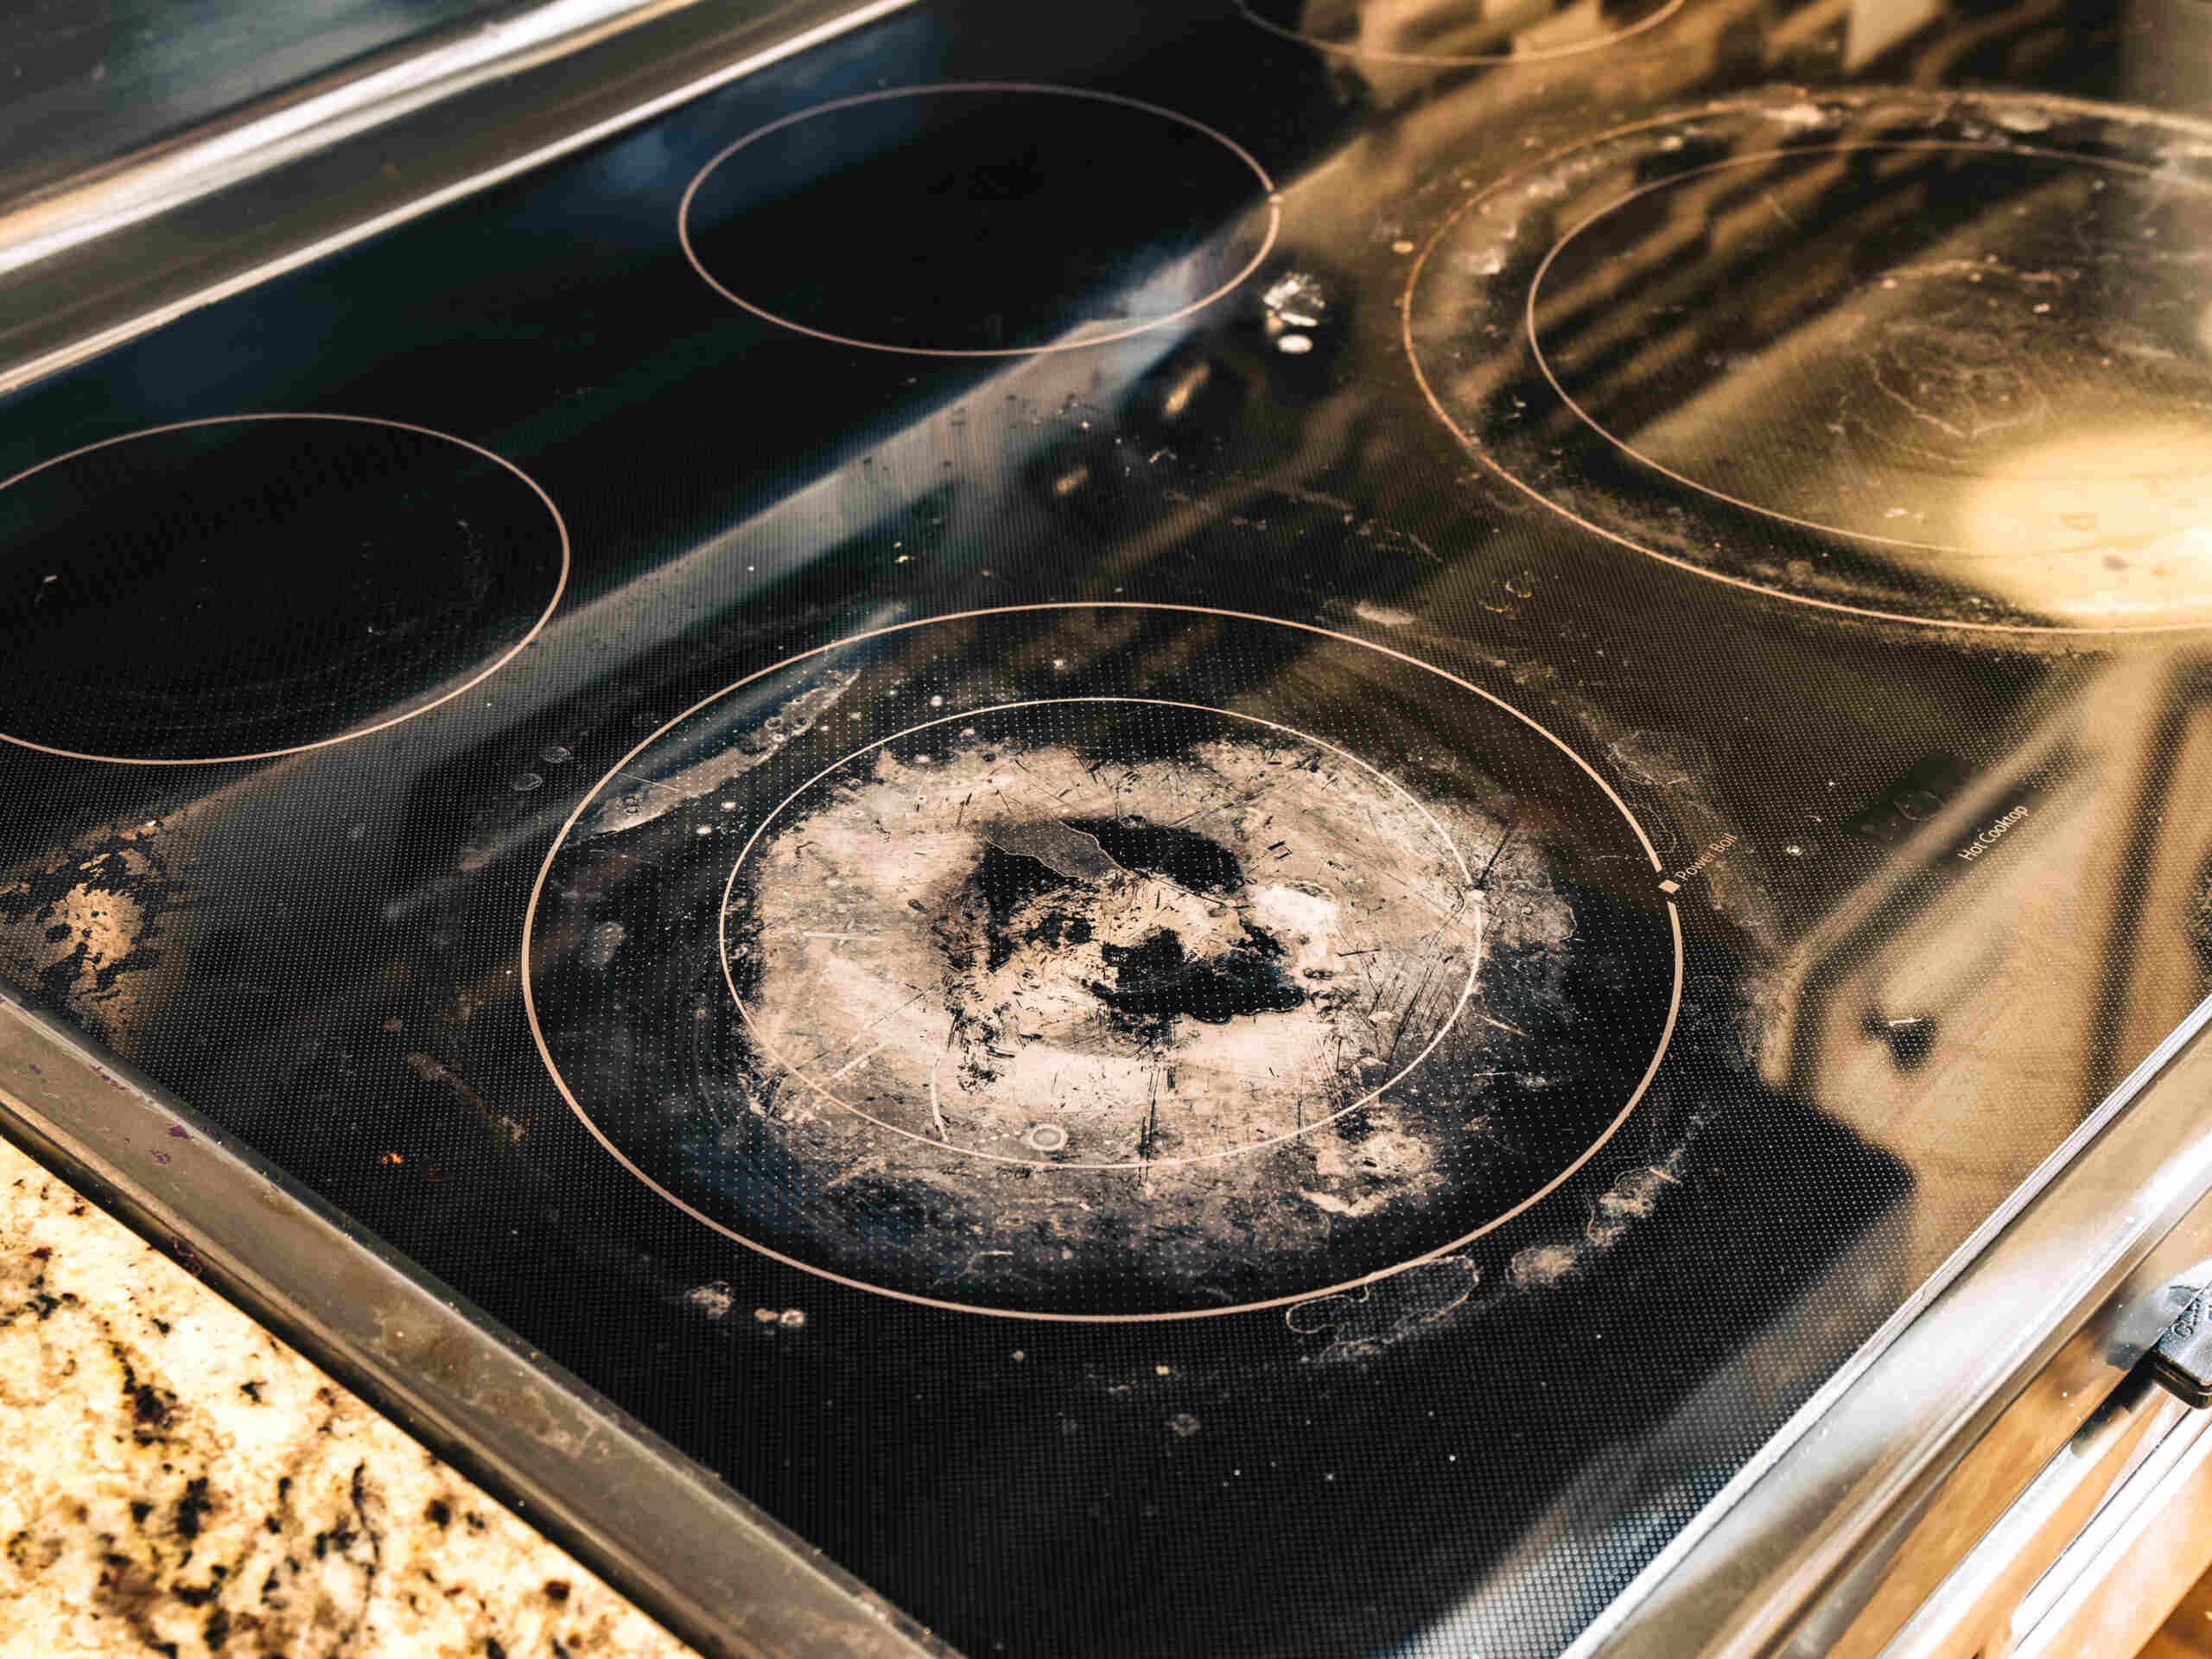 How To Remove Glass Cooktop From Counter